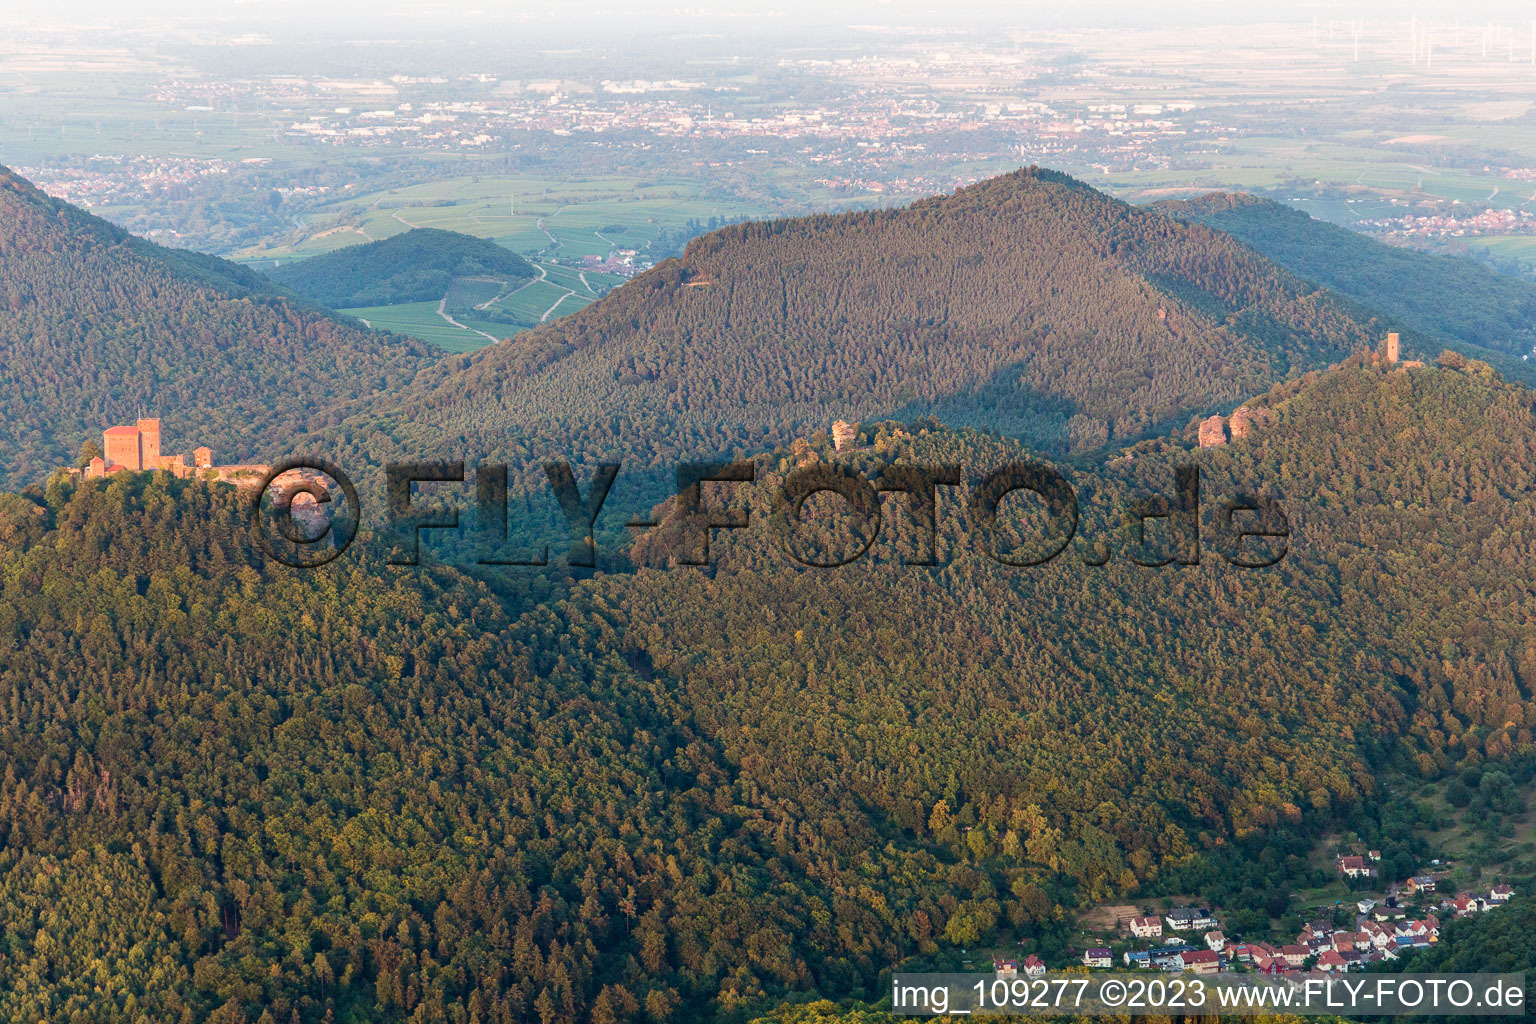 Aerial photograpy of Wernersberg in the state Rhineland-Palatinate, Germany